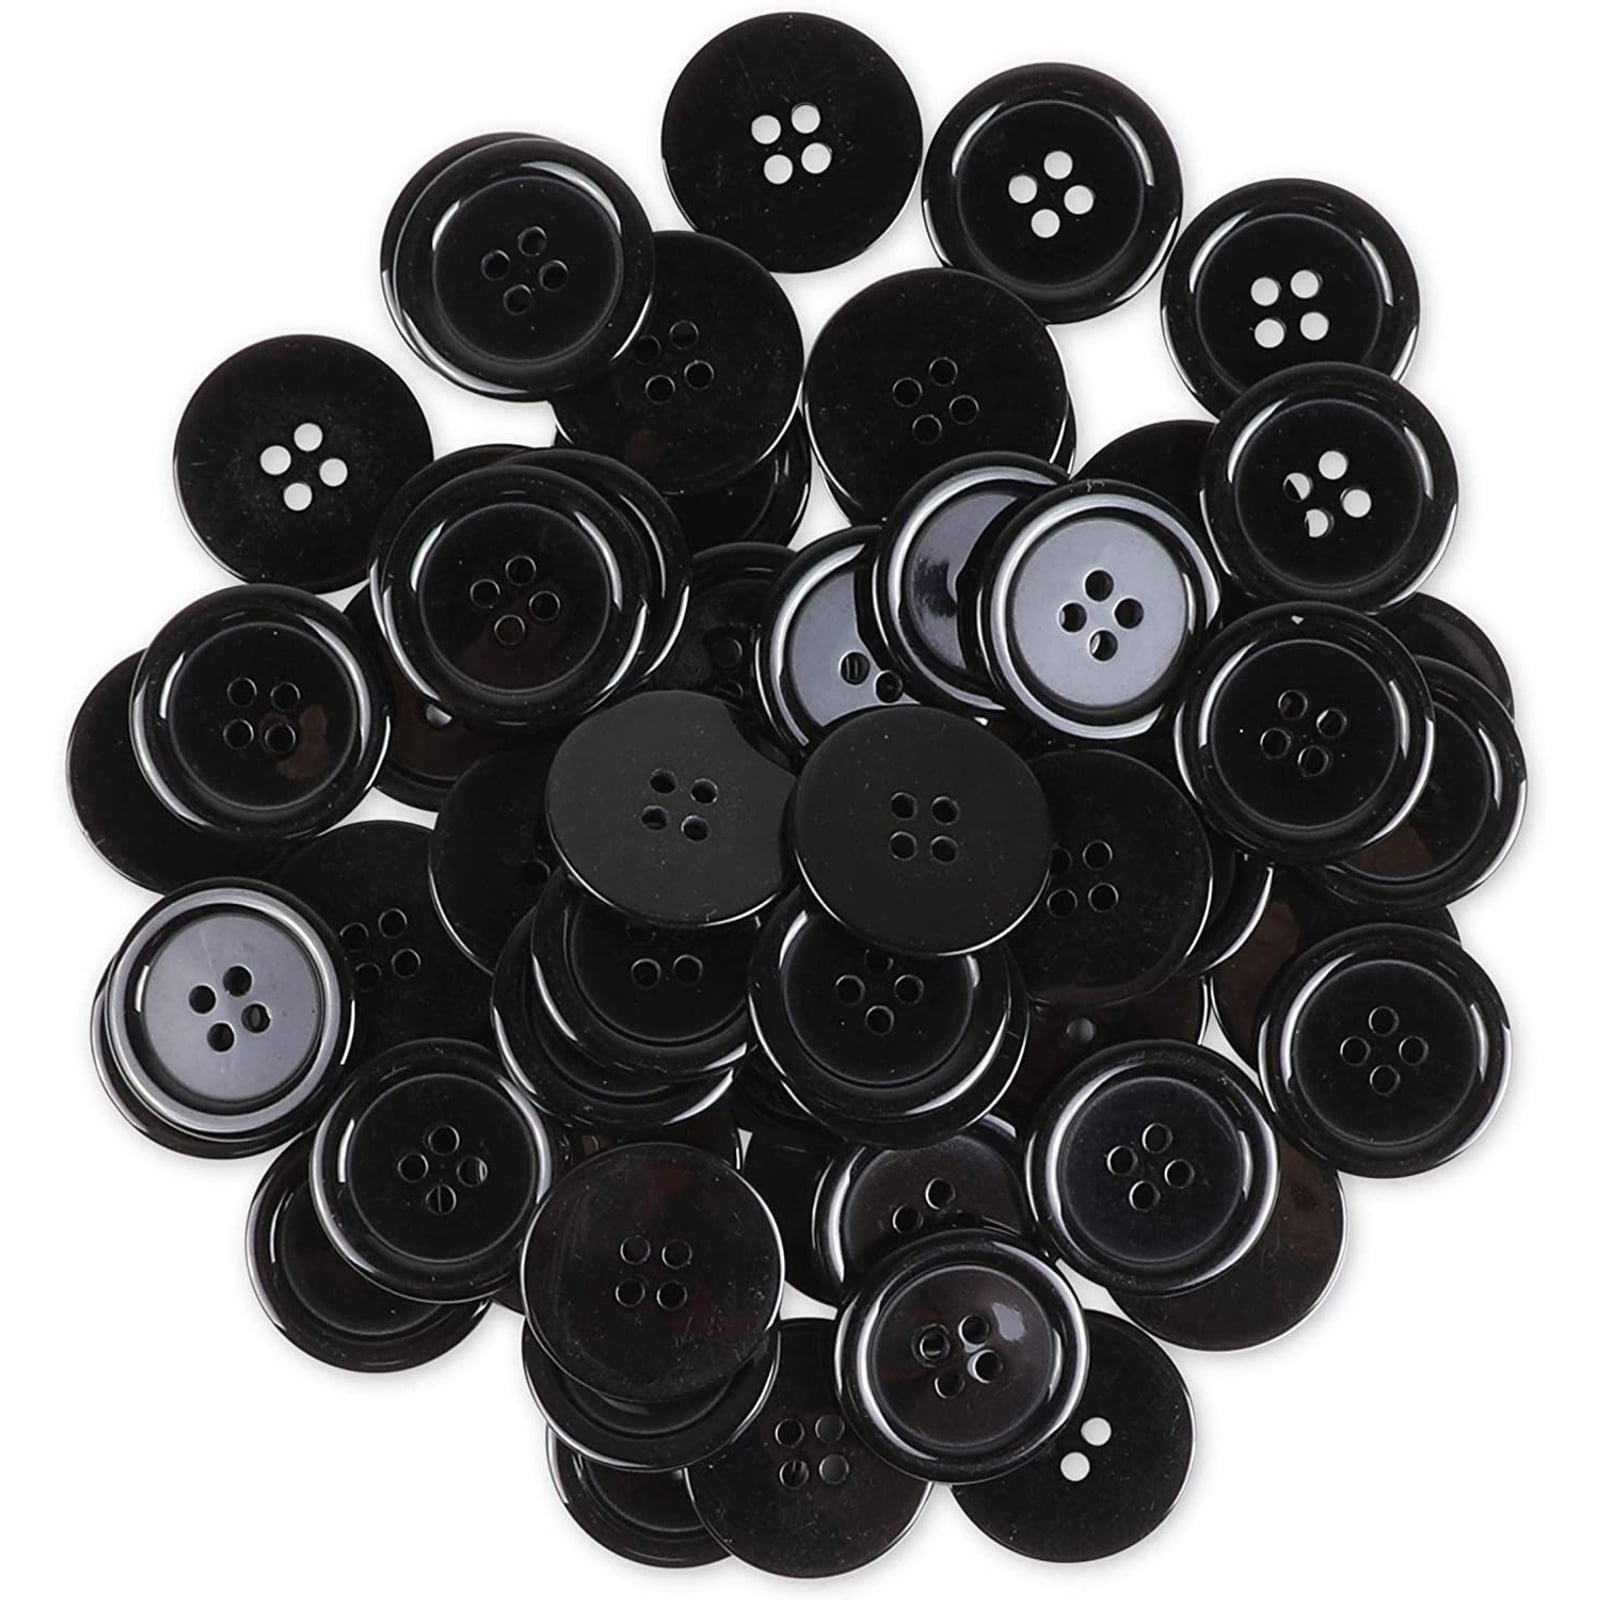 Crafts New Set of 20 Mini BLACK BUTTONS 4 holes Flat Plastic 3/4" Sewing